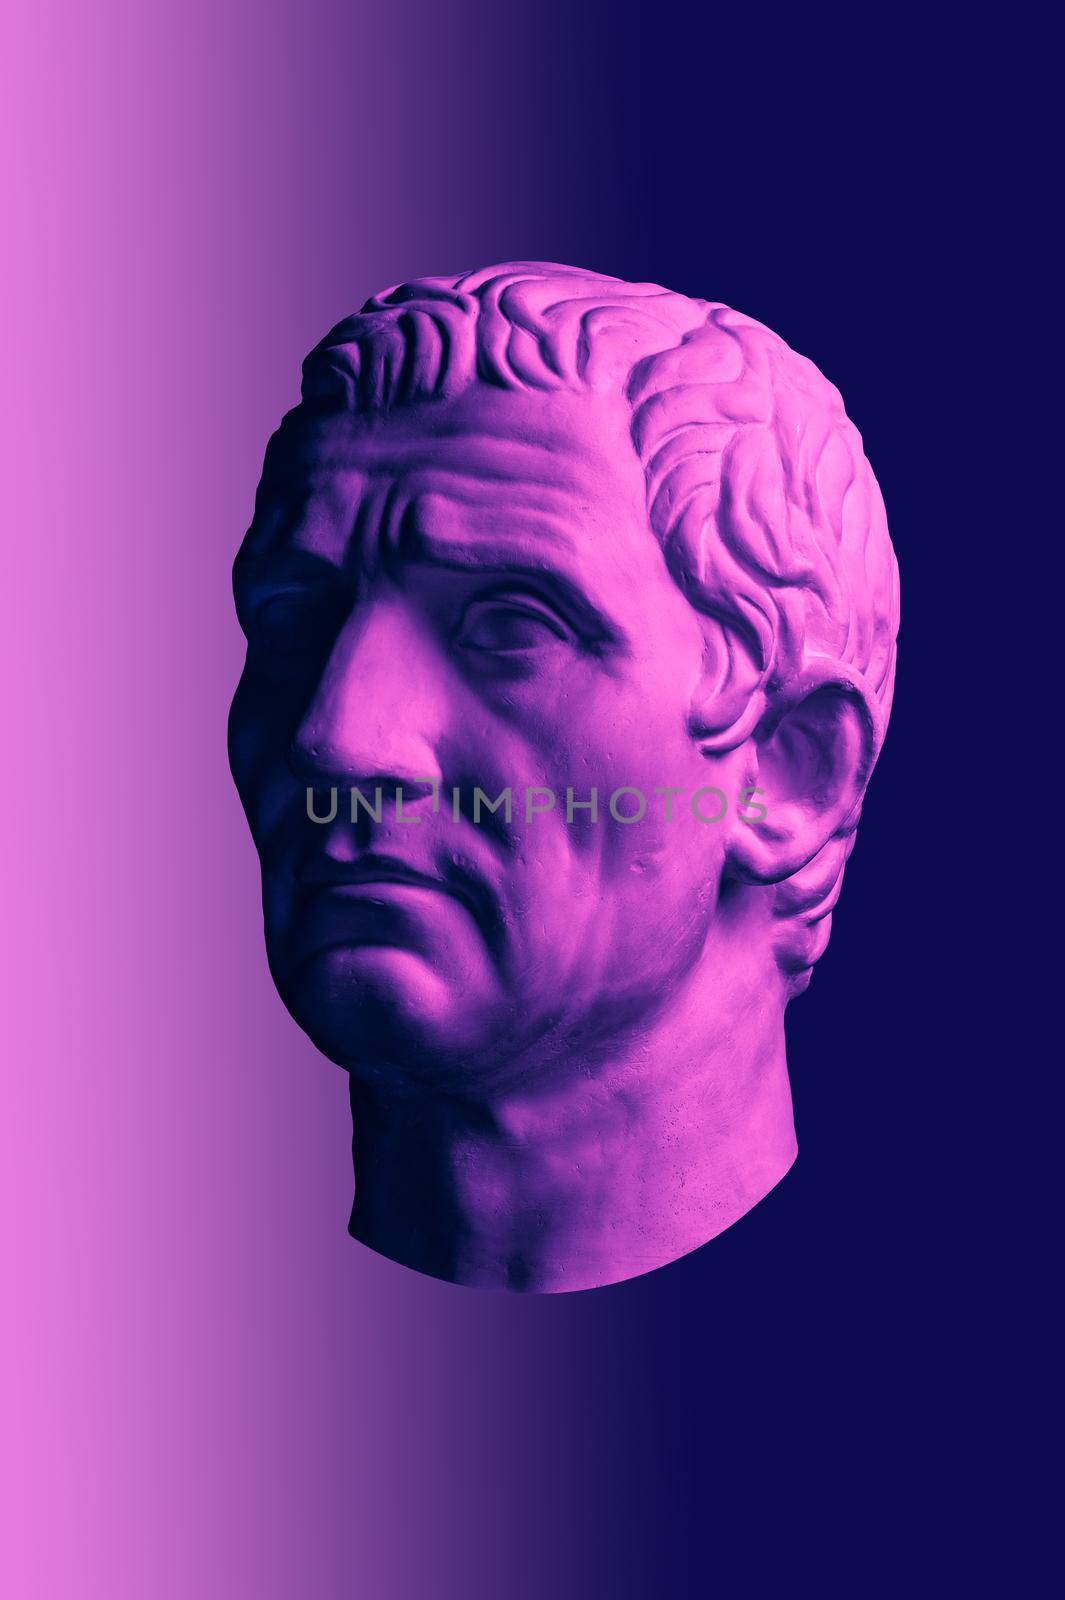 Statue of Guy Julius Caesar Octavian Augustus. Creative concept colorful neon image with ancient roman sculpture Guy Julius Caesar Octavian Augustus head. Cyberpunk, vaporwave and surreal art style. by bashta